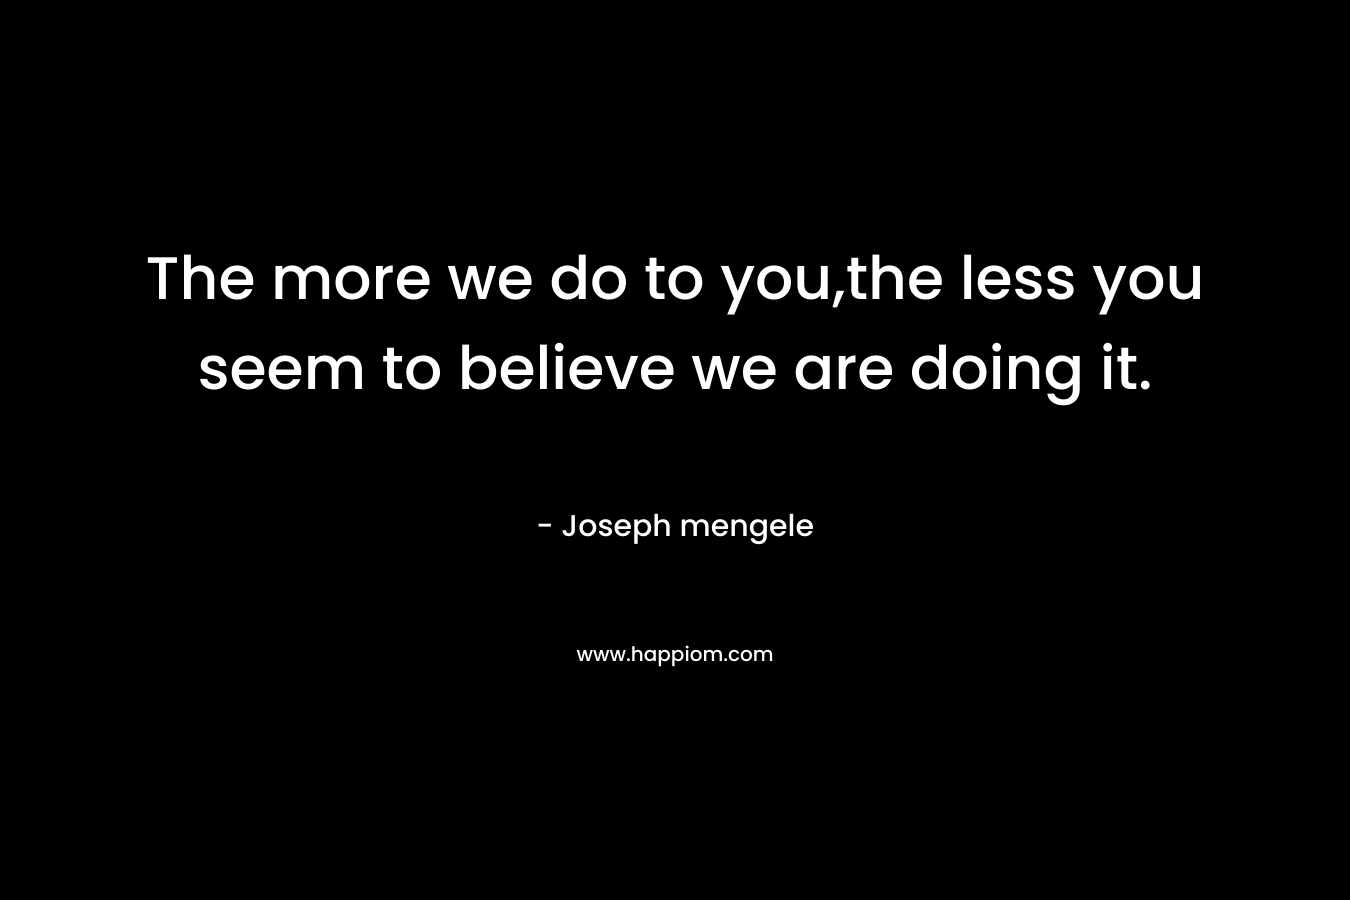 The more we do to you,the less you seem to believe we are doing it. – Joseph mengele